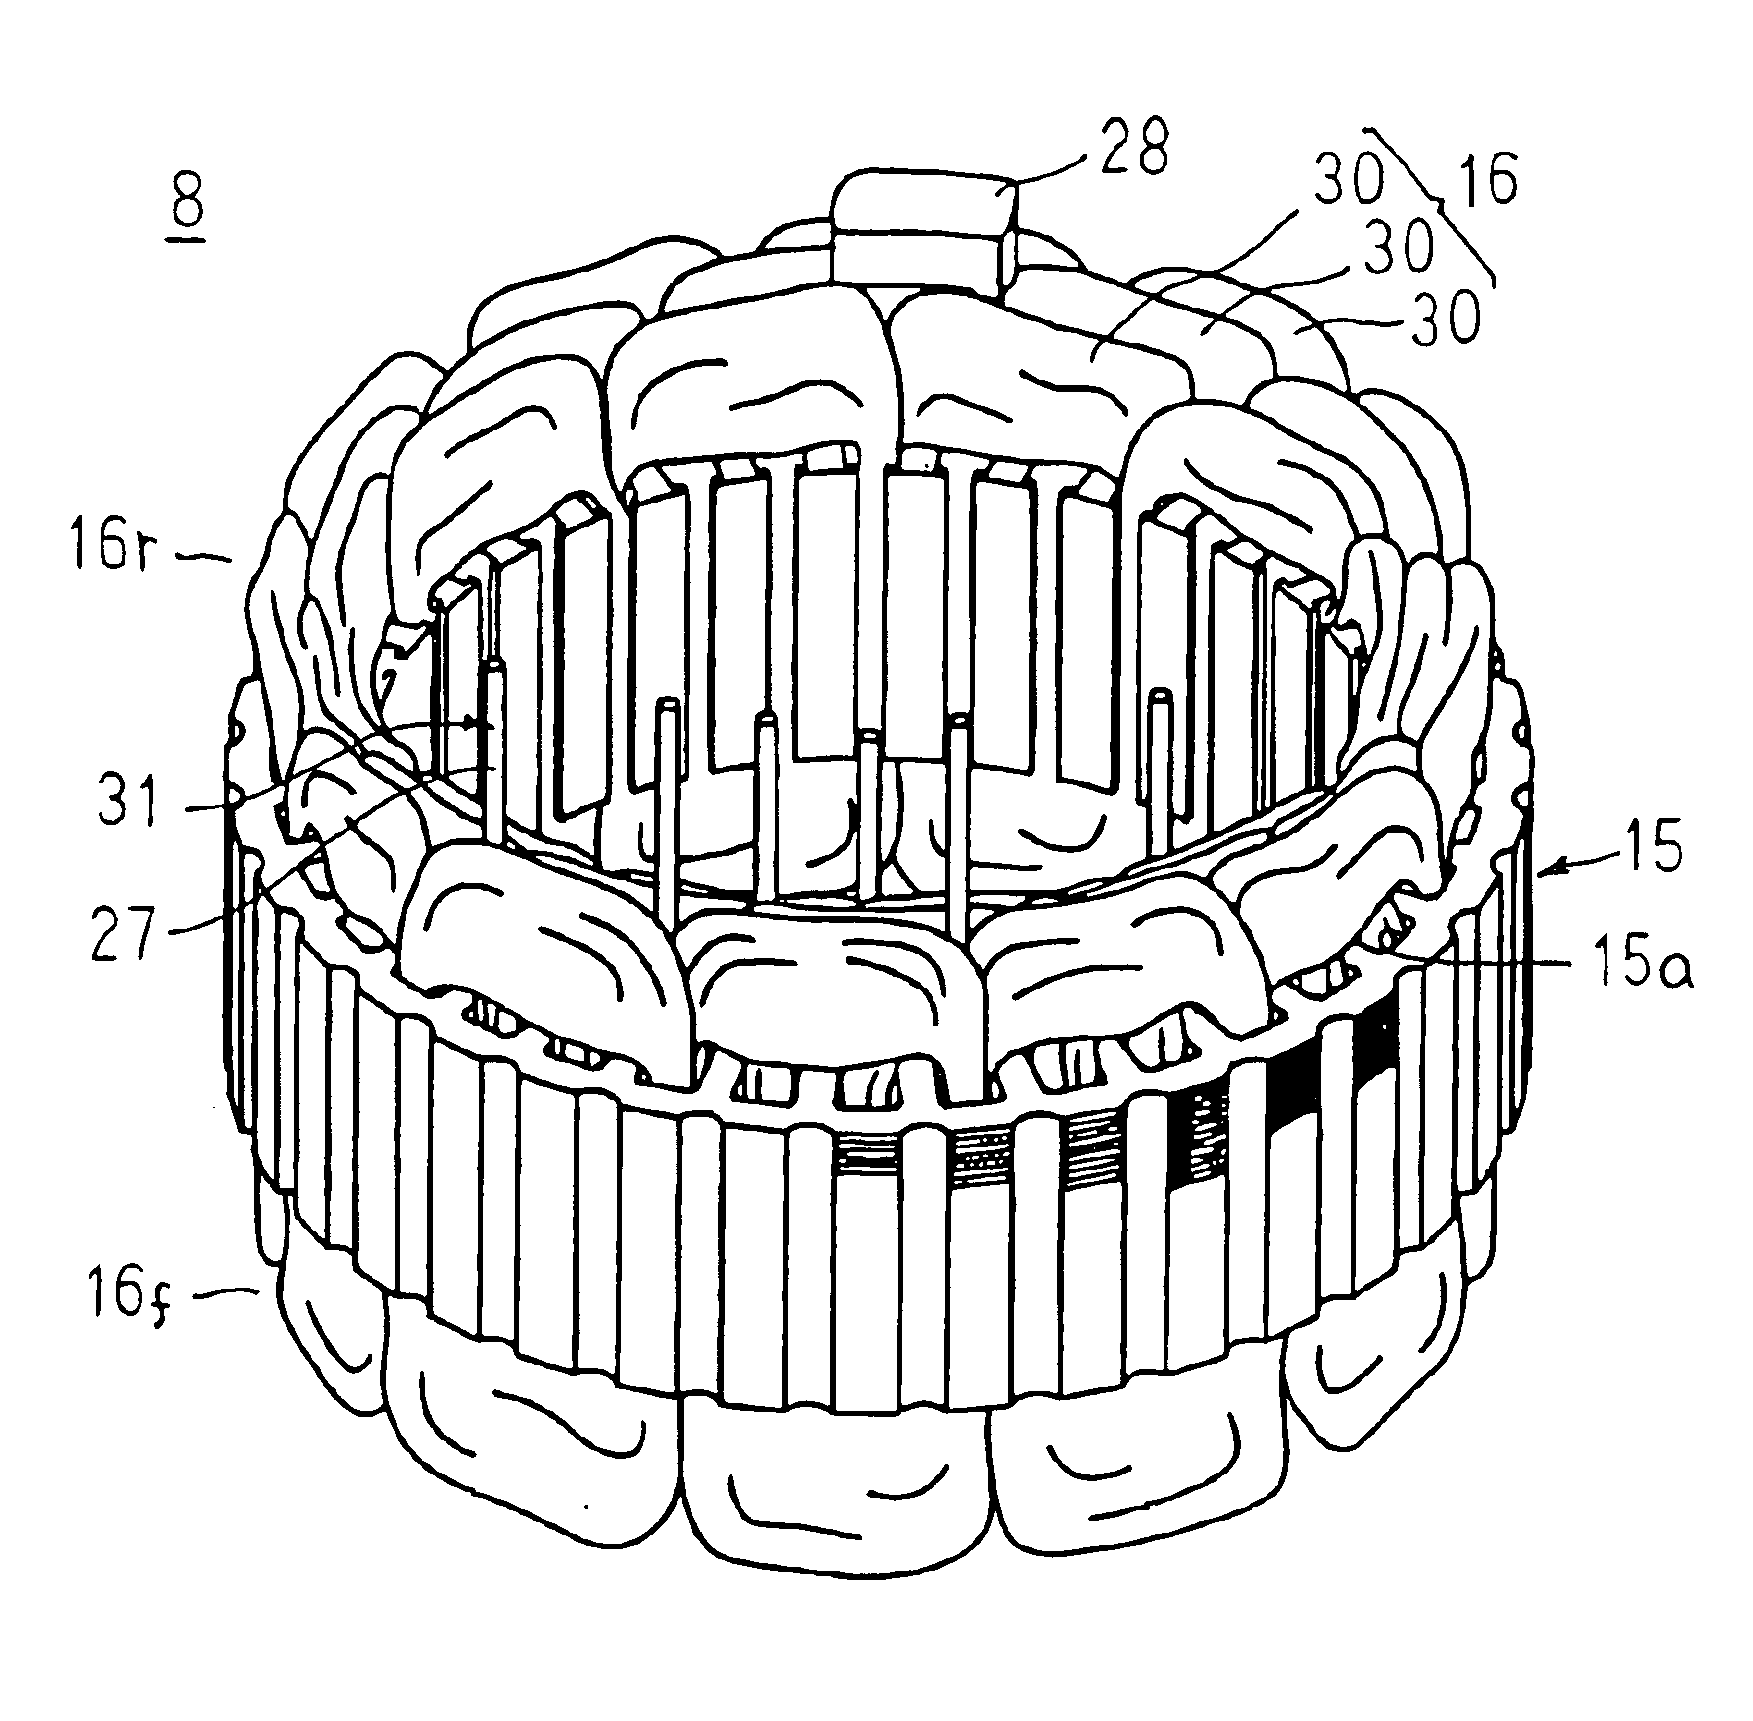 Stator for a dynamoelectric machine